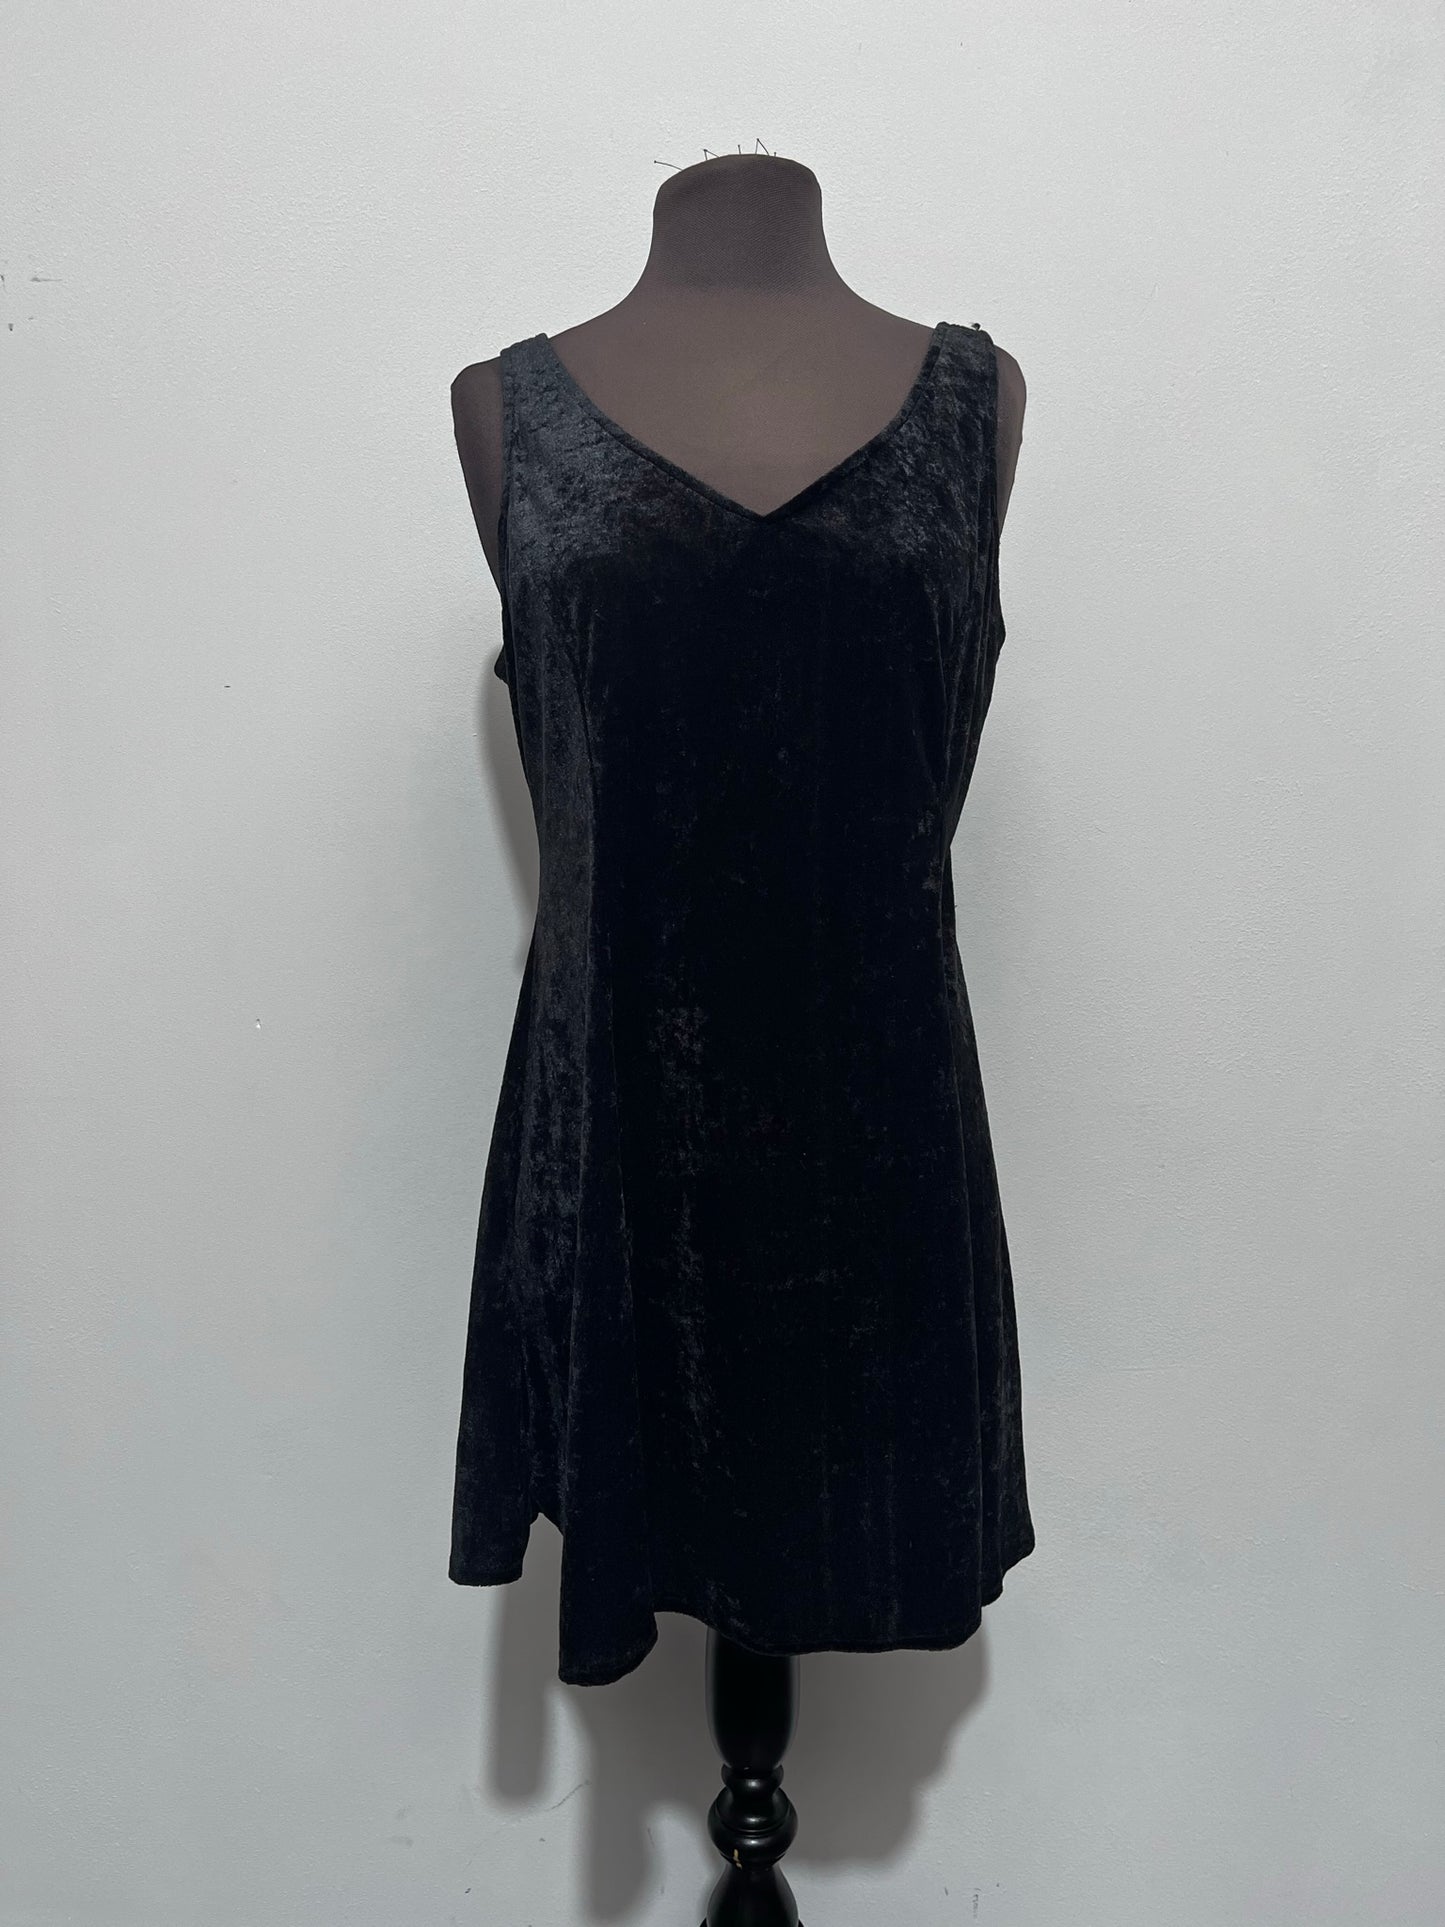 Little Black Dress Insight Clothing Halloween costume Size 12-14 (label says 16)